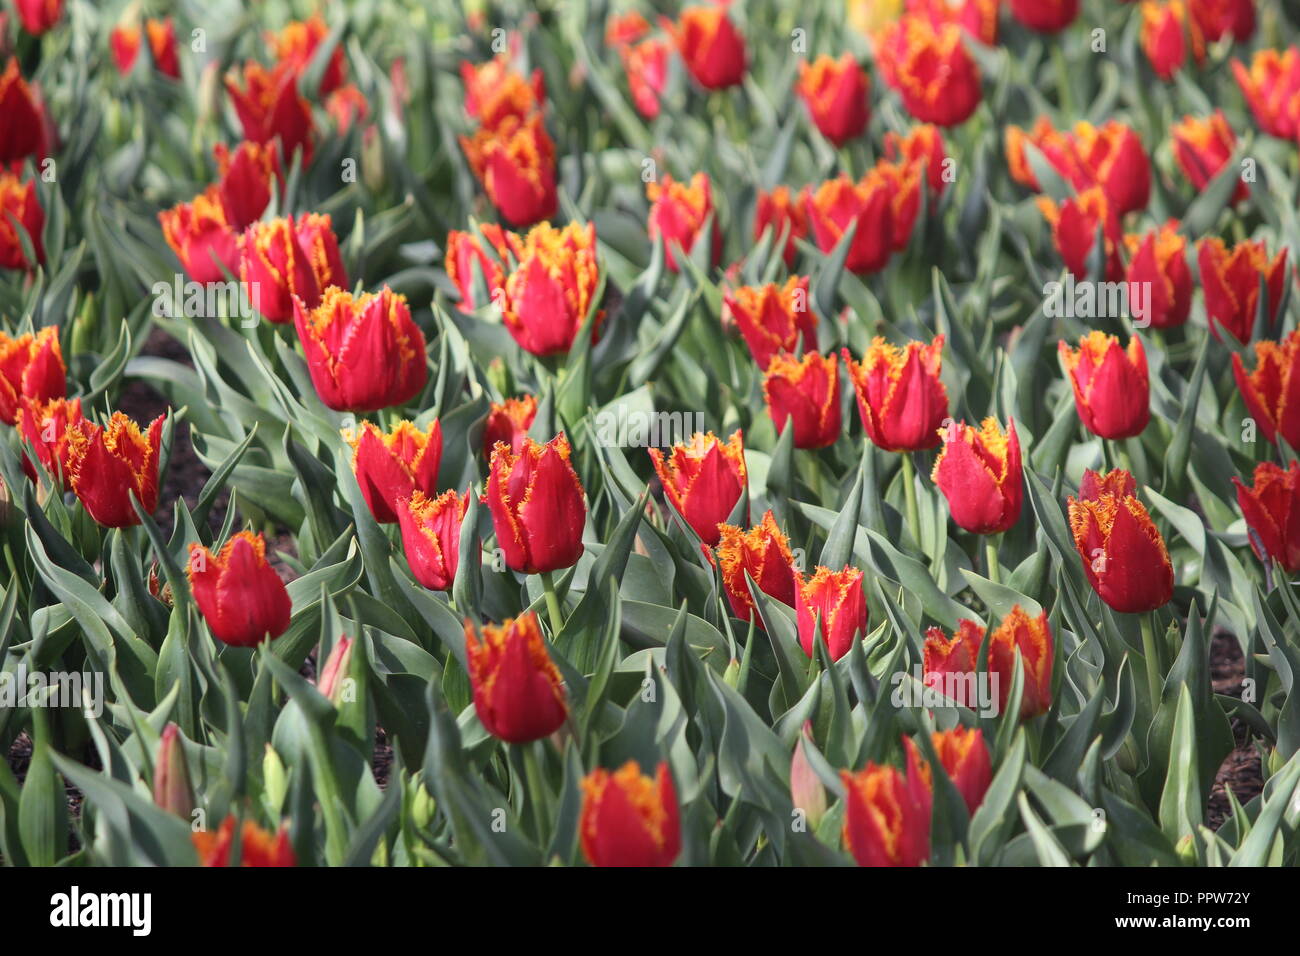 Fire / flame tulips flowering on sunny spring day at Tulip Top Garden, NSW, Australia Stock Photo